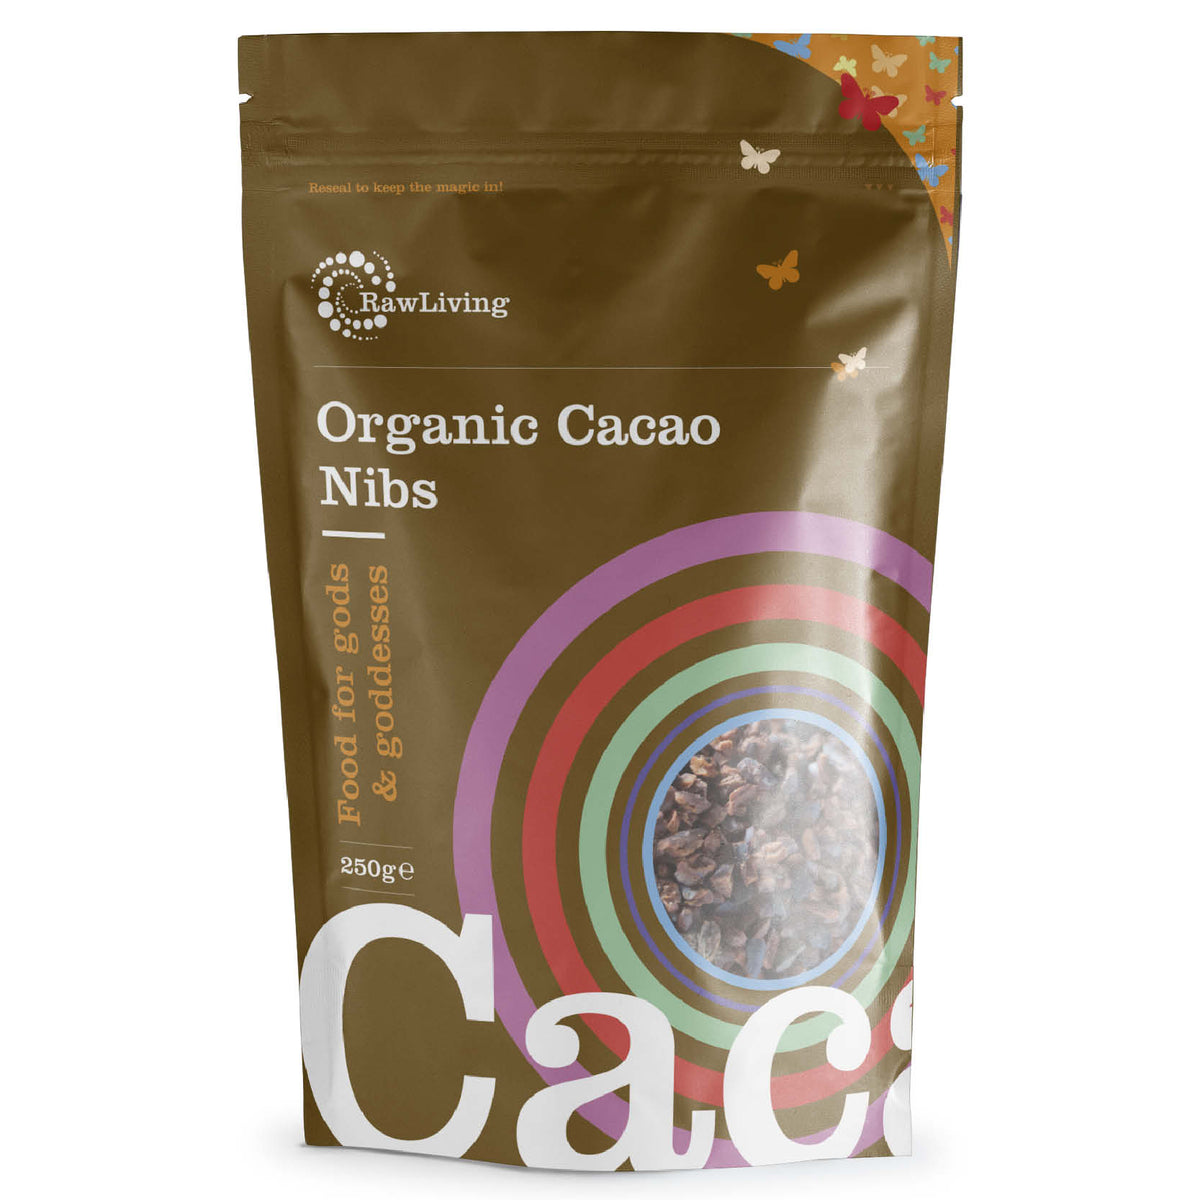 Organic Cacao Nibs Peruvian | Raw Living UK | Raw Foods | Super Foods | Raw Living Organic Raw Peruvian Cacao Nibs: Chocolate in its purest form (the whole Cacao Bean), broken into &#39;Nibs&#39;. High in Magnesium, Sulphur &amp; Antioxidants.